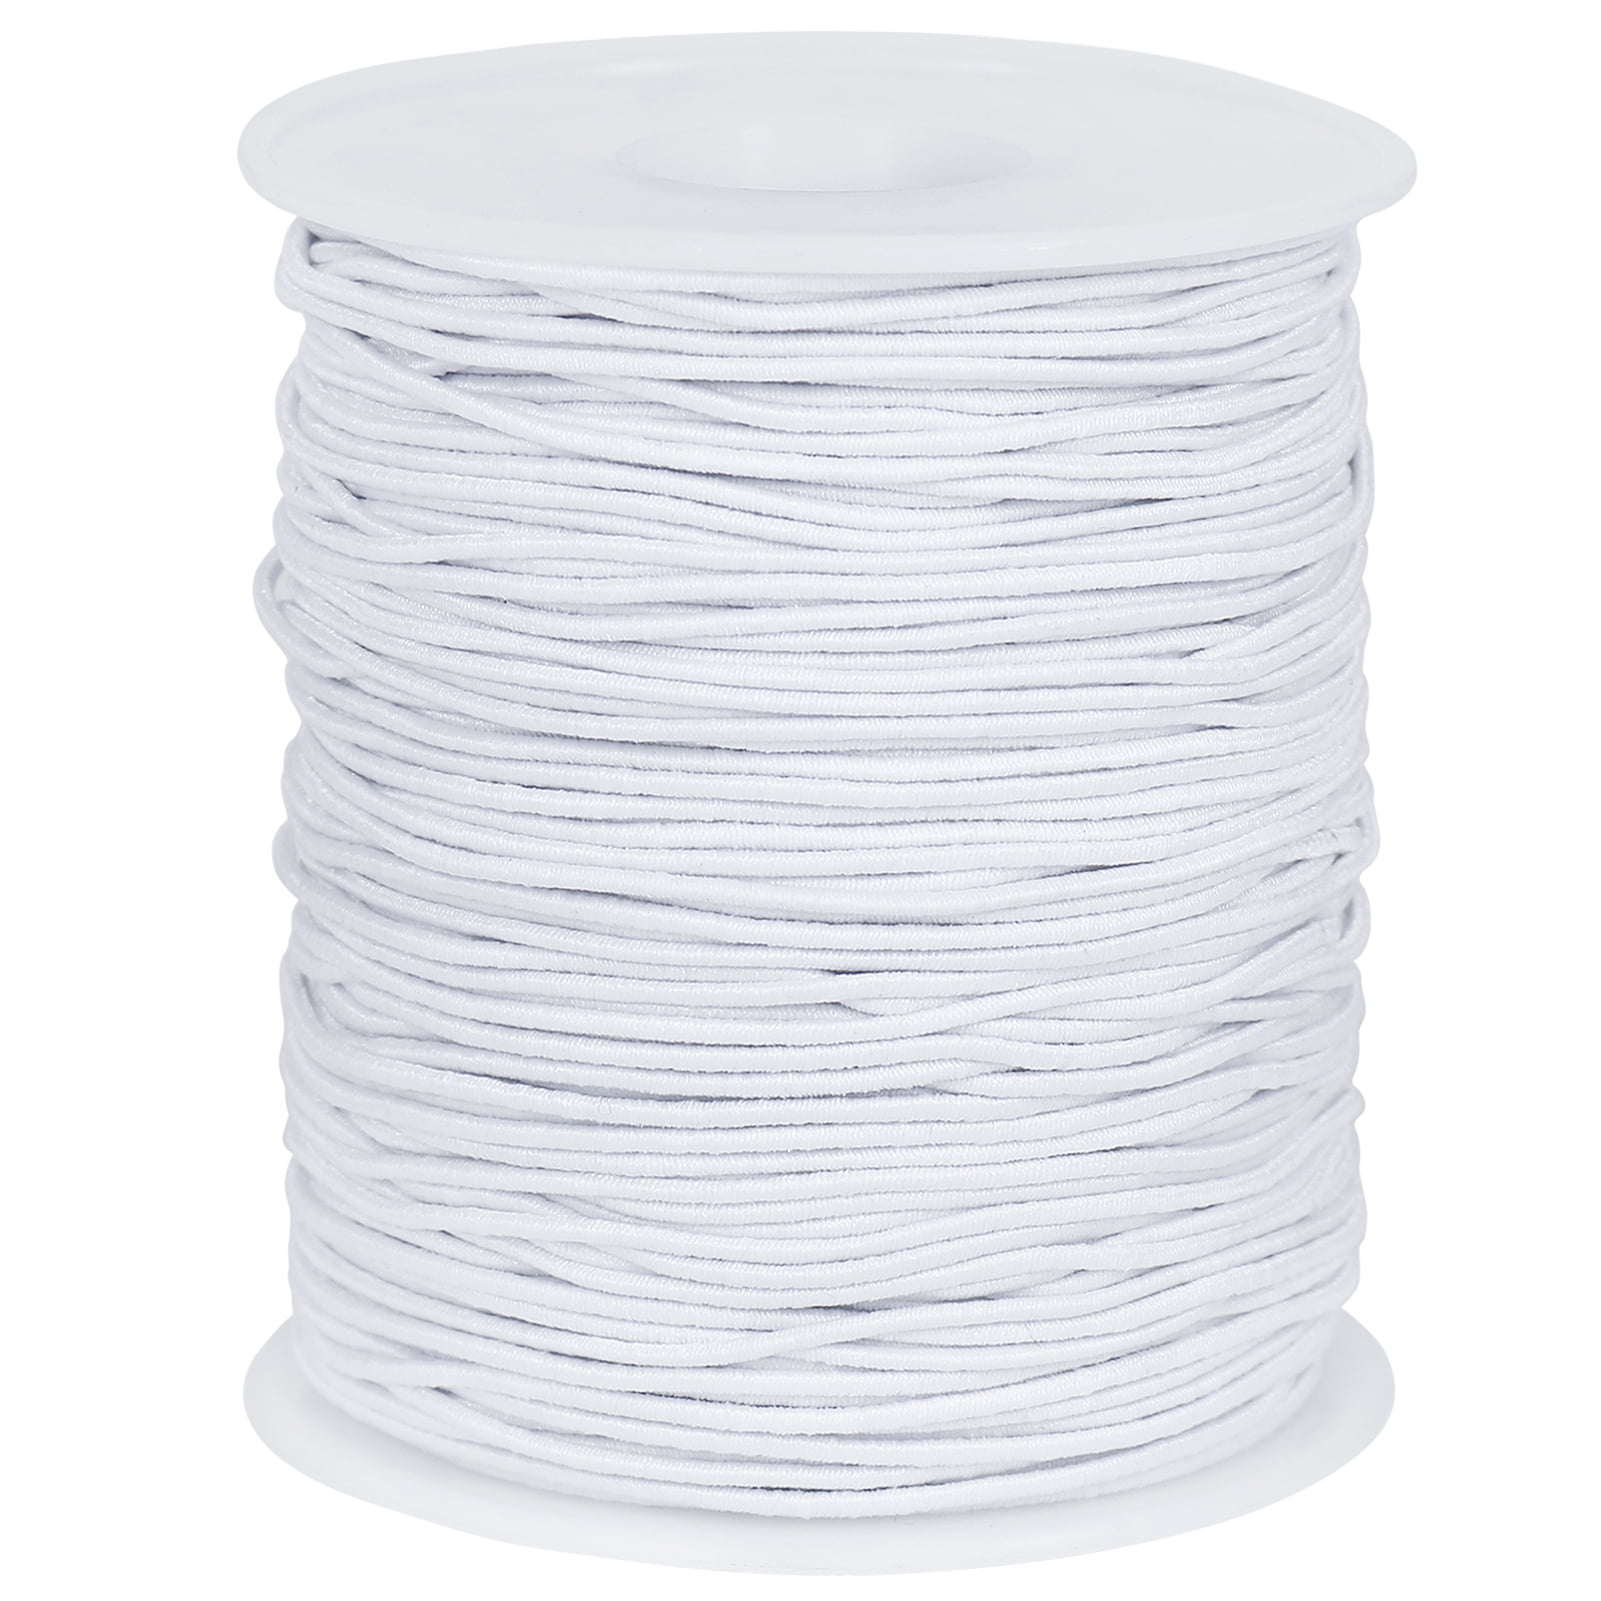 Trianu 2 Rolls White String, 656 feet 2mm Cotton Bakers Twine, Natural  White Cotton String for Crafts, Gift Wrapping String, Arts & Crafts, Home  Decor and Gift Packaging 